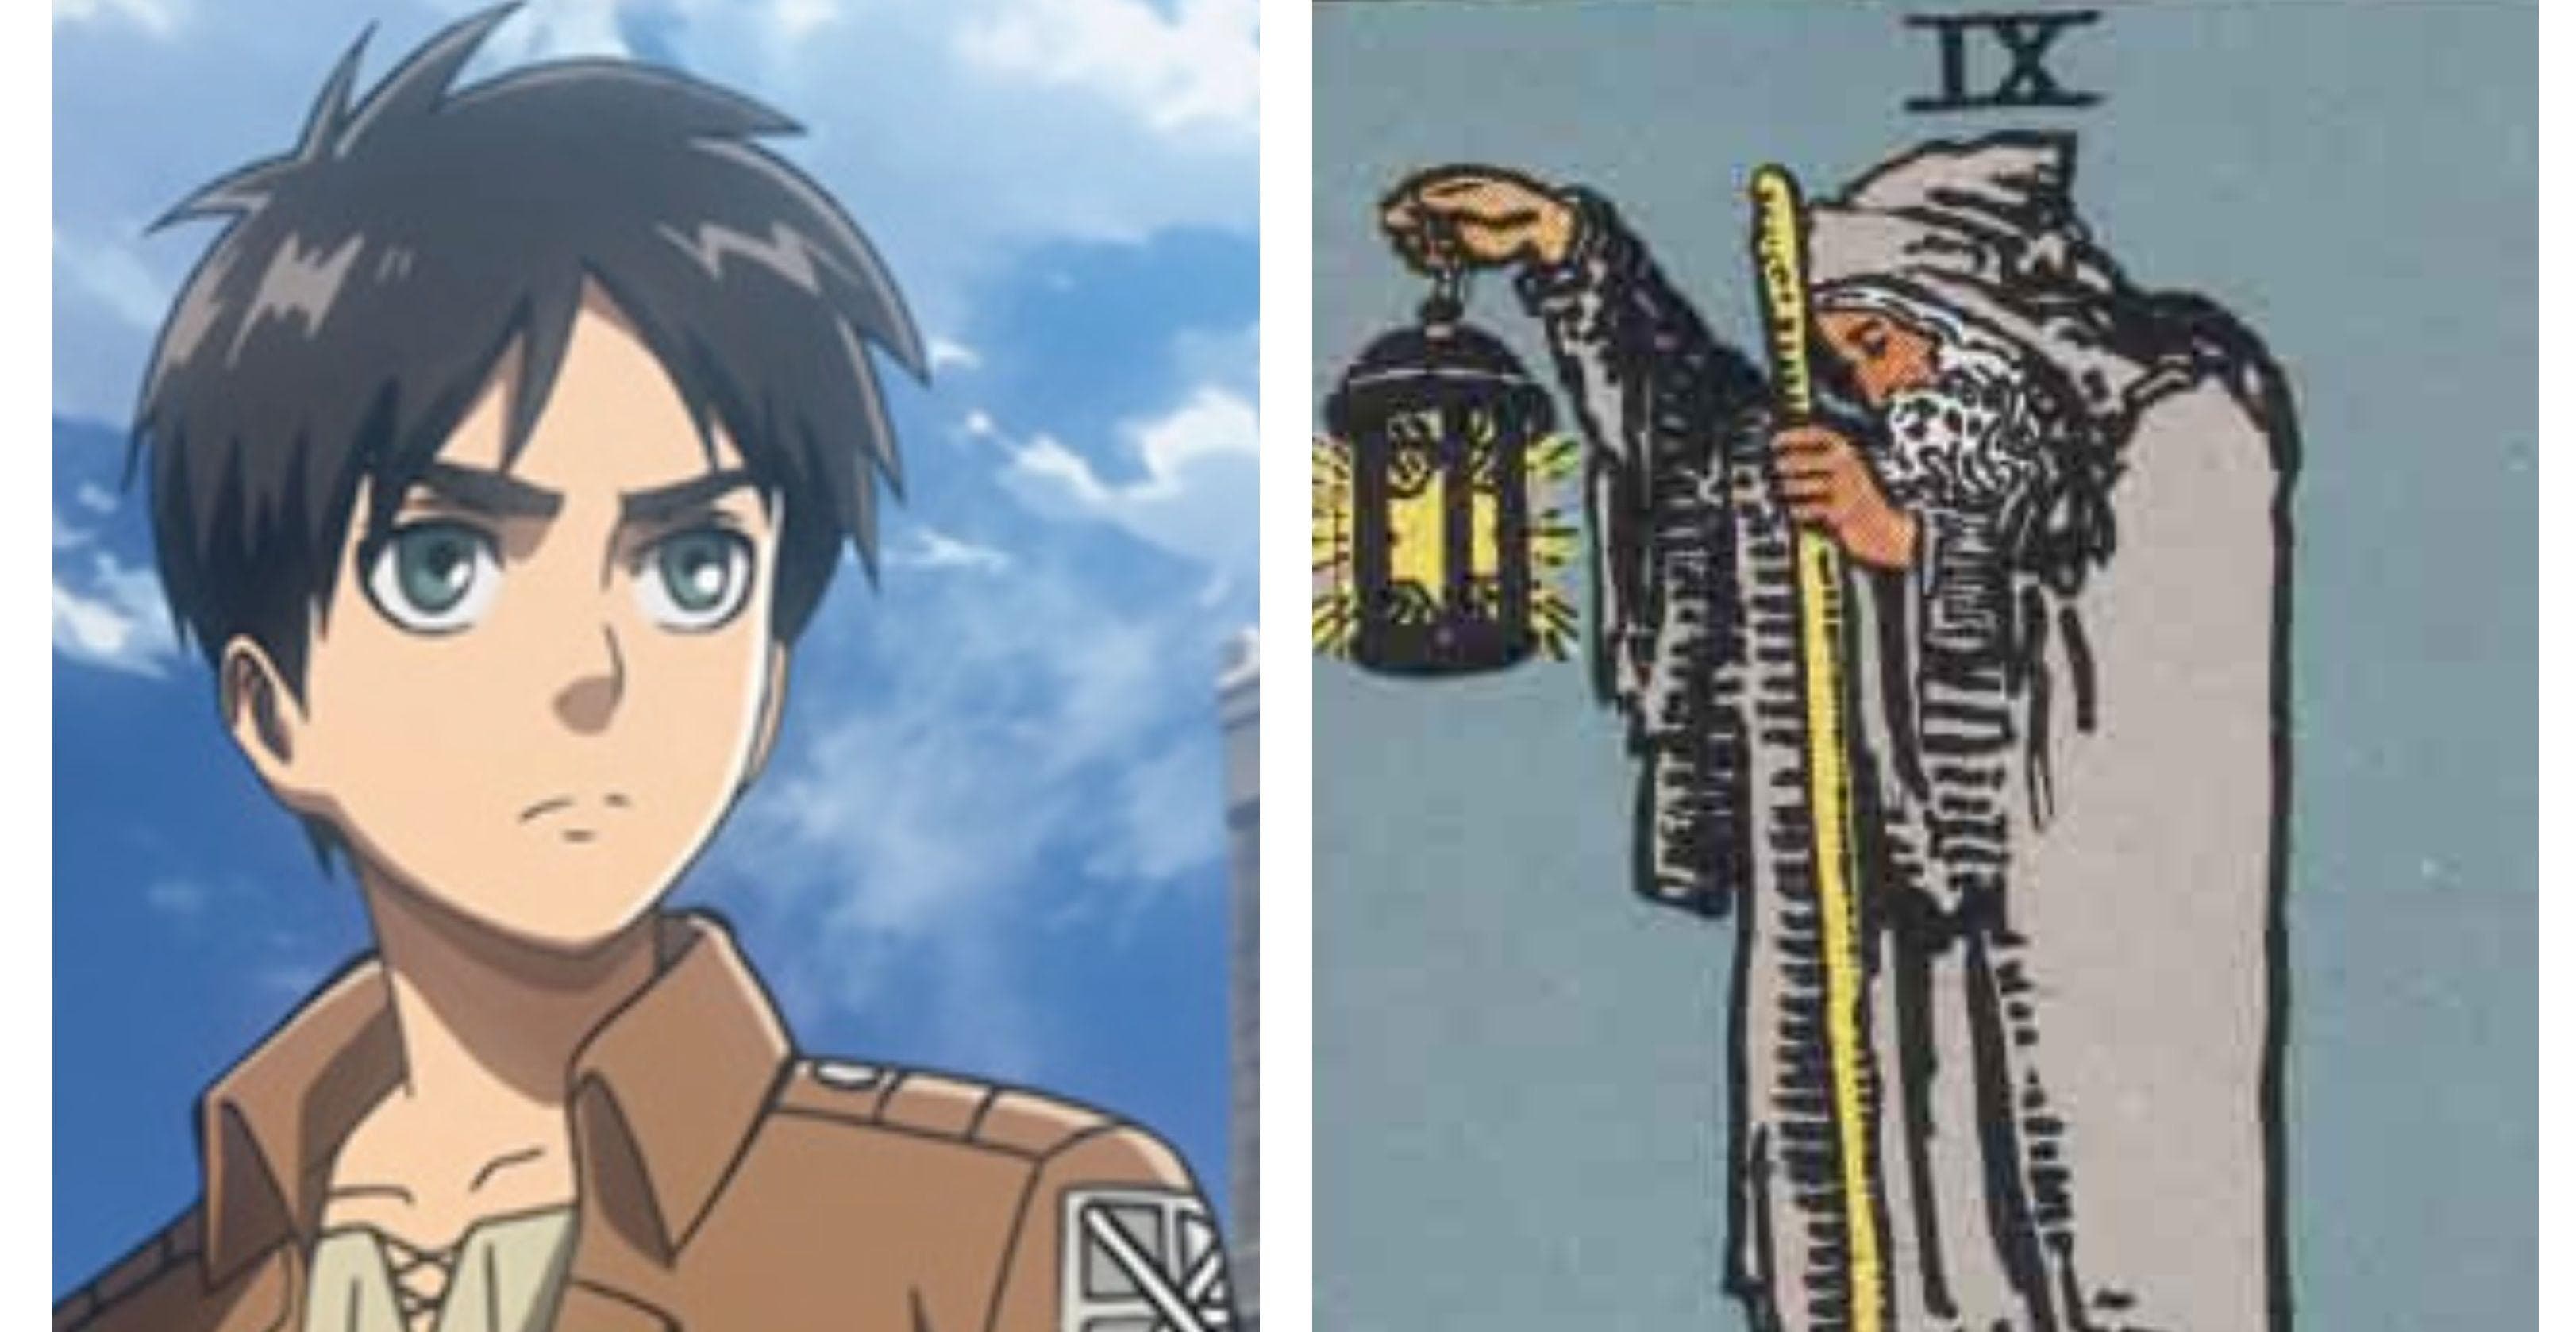 A Guide To The Surprisingly Deep Symbolism Behind 'Attack On Titan'